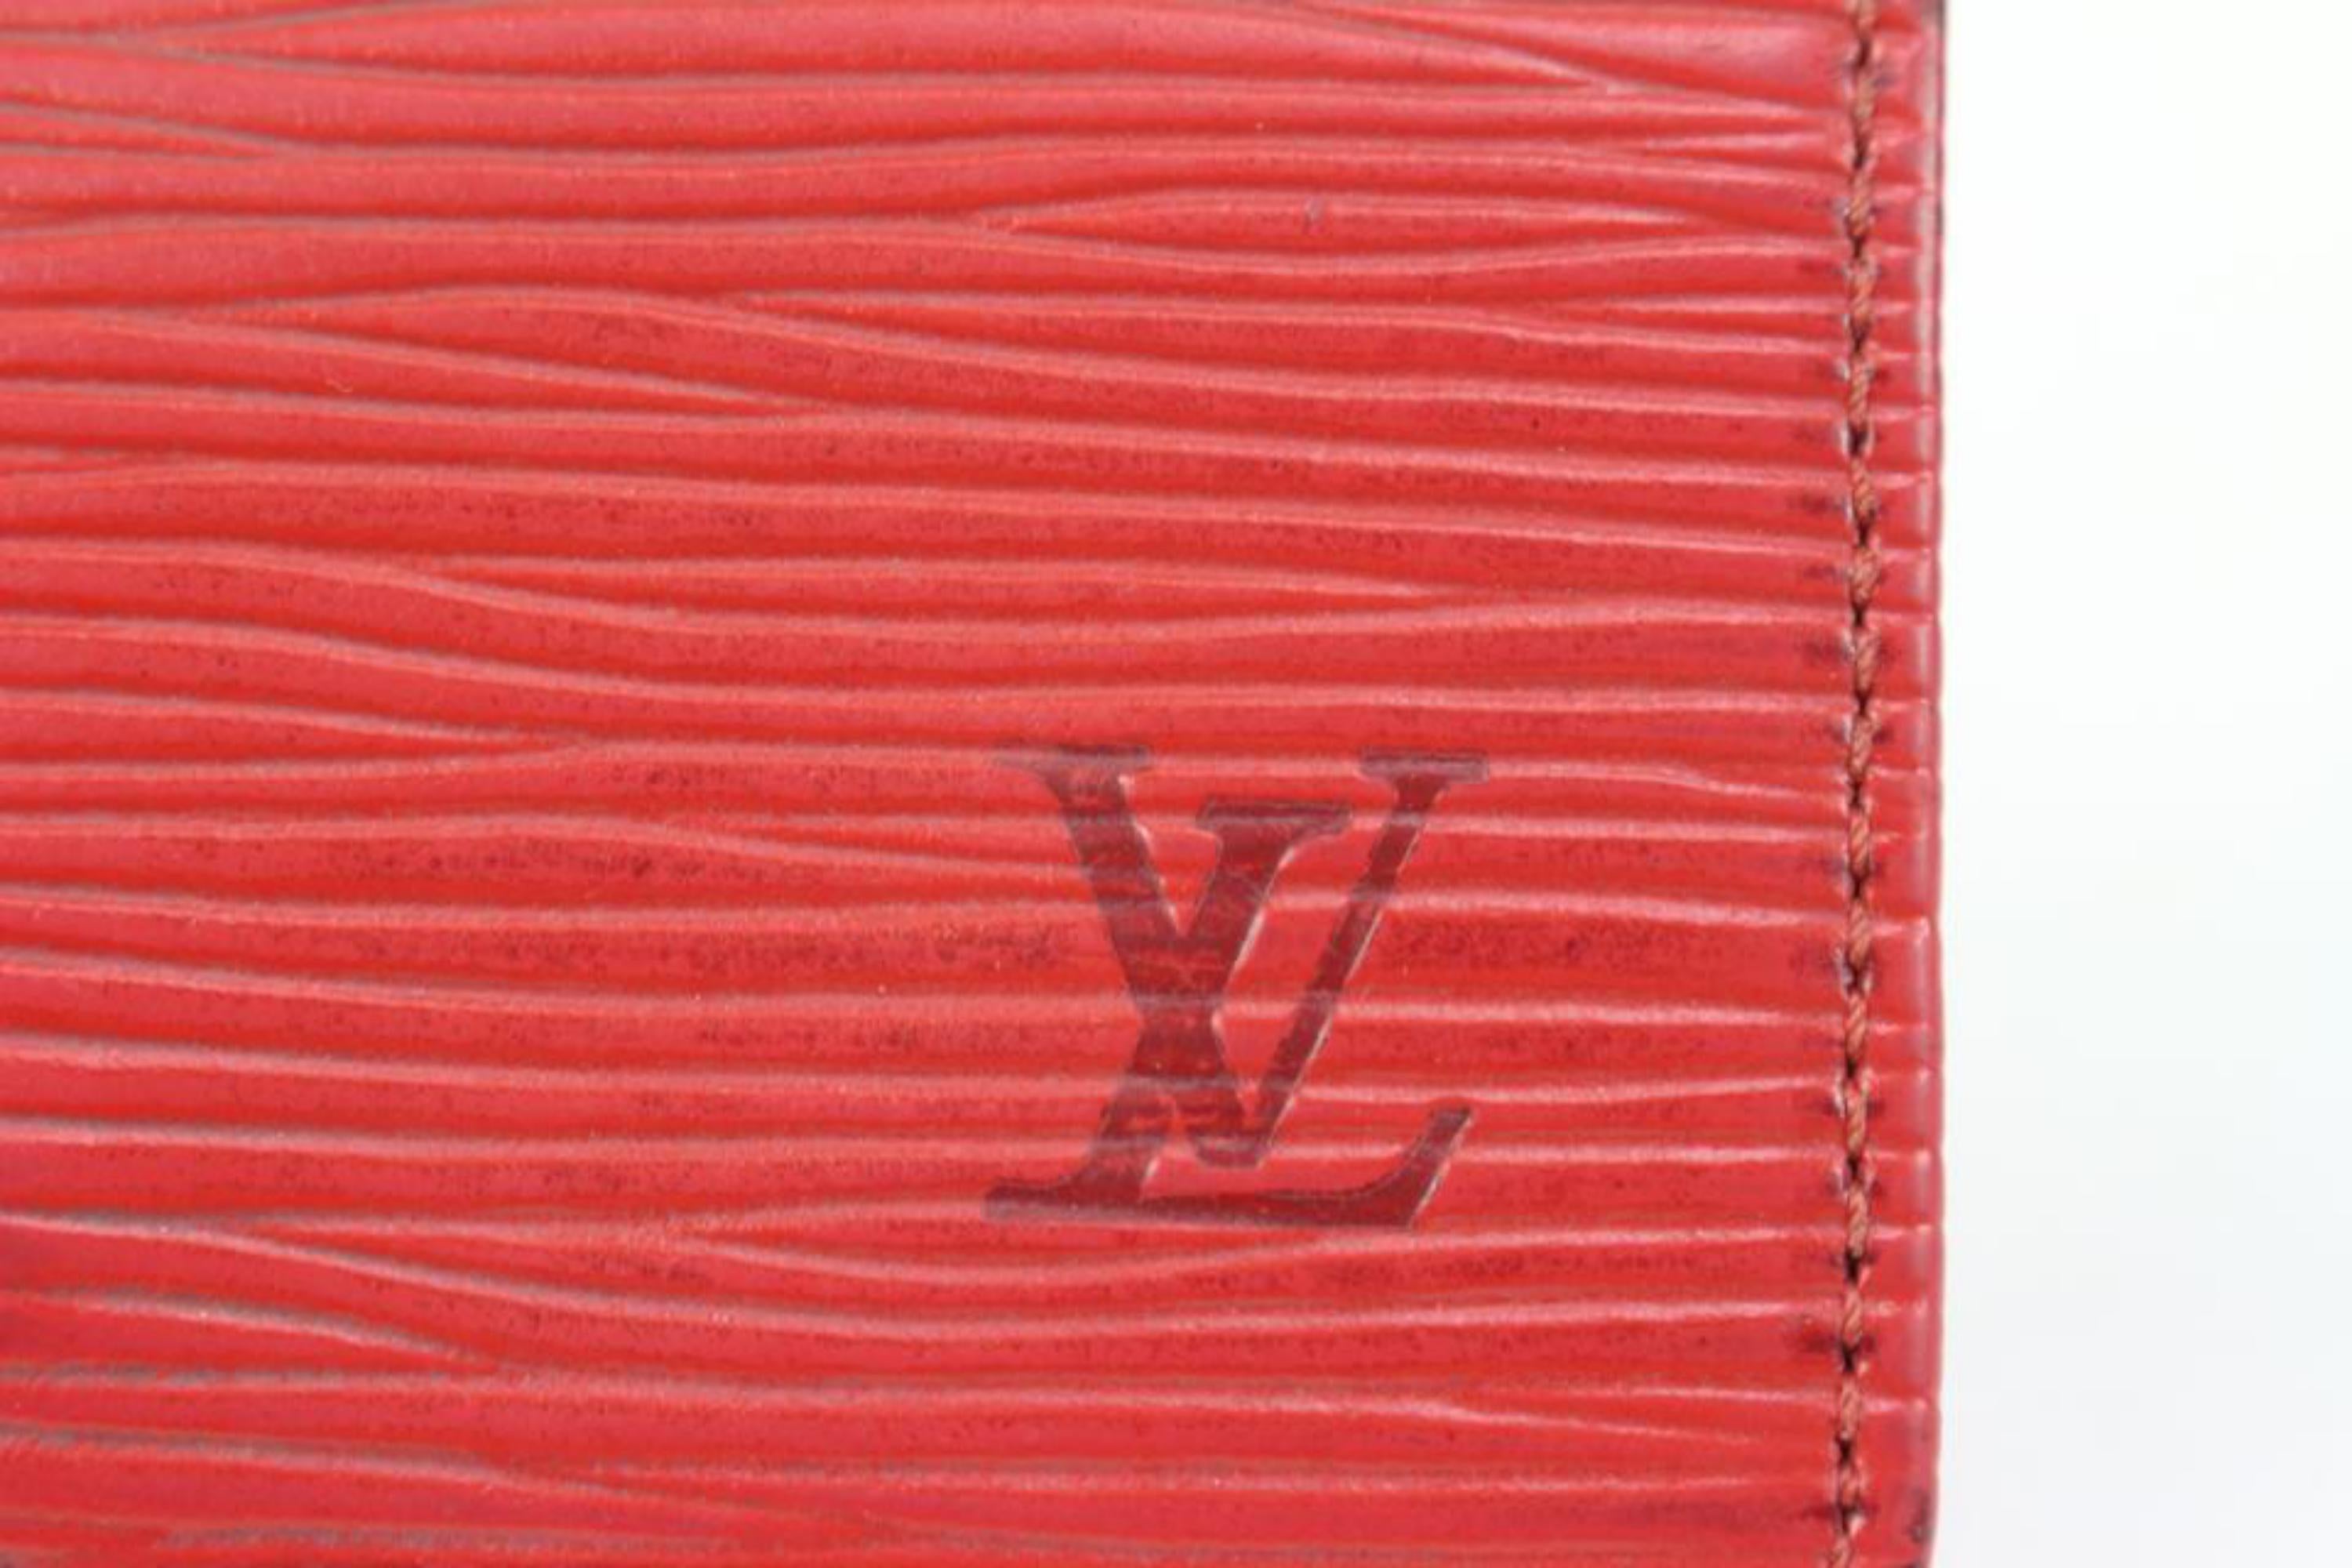 Louis Vuitton Red Epi Leather 4 Key Holder Multicles s330lk29 1